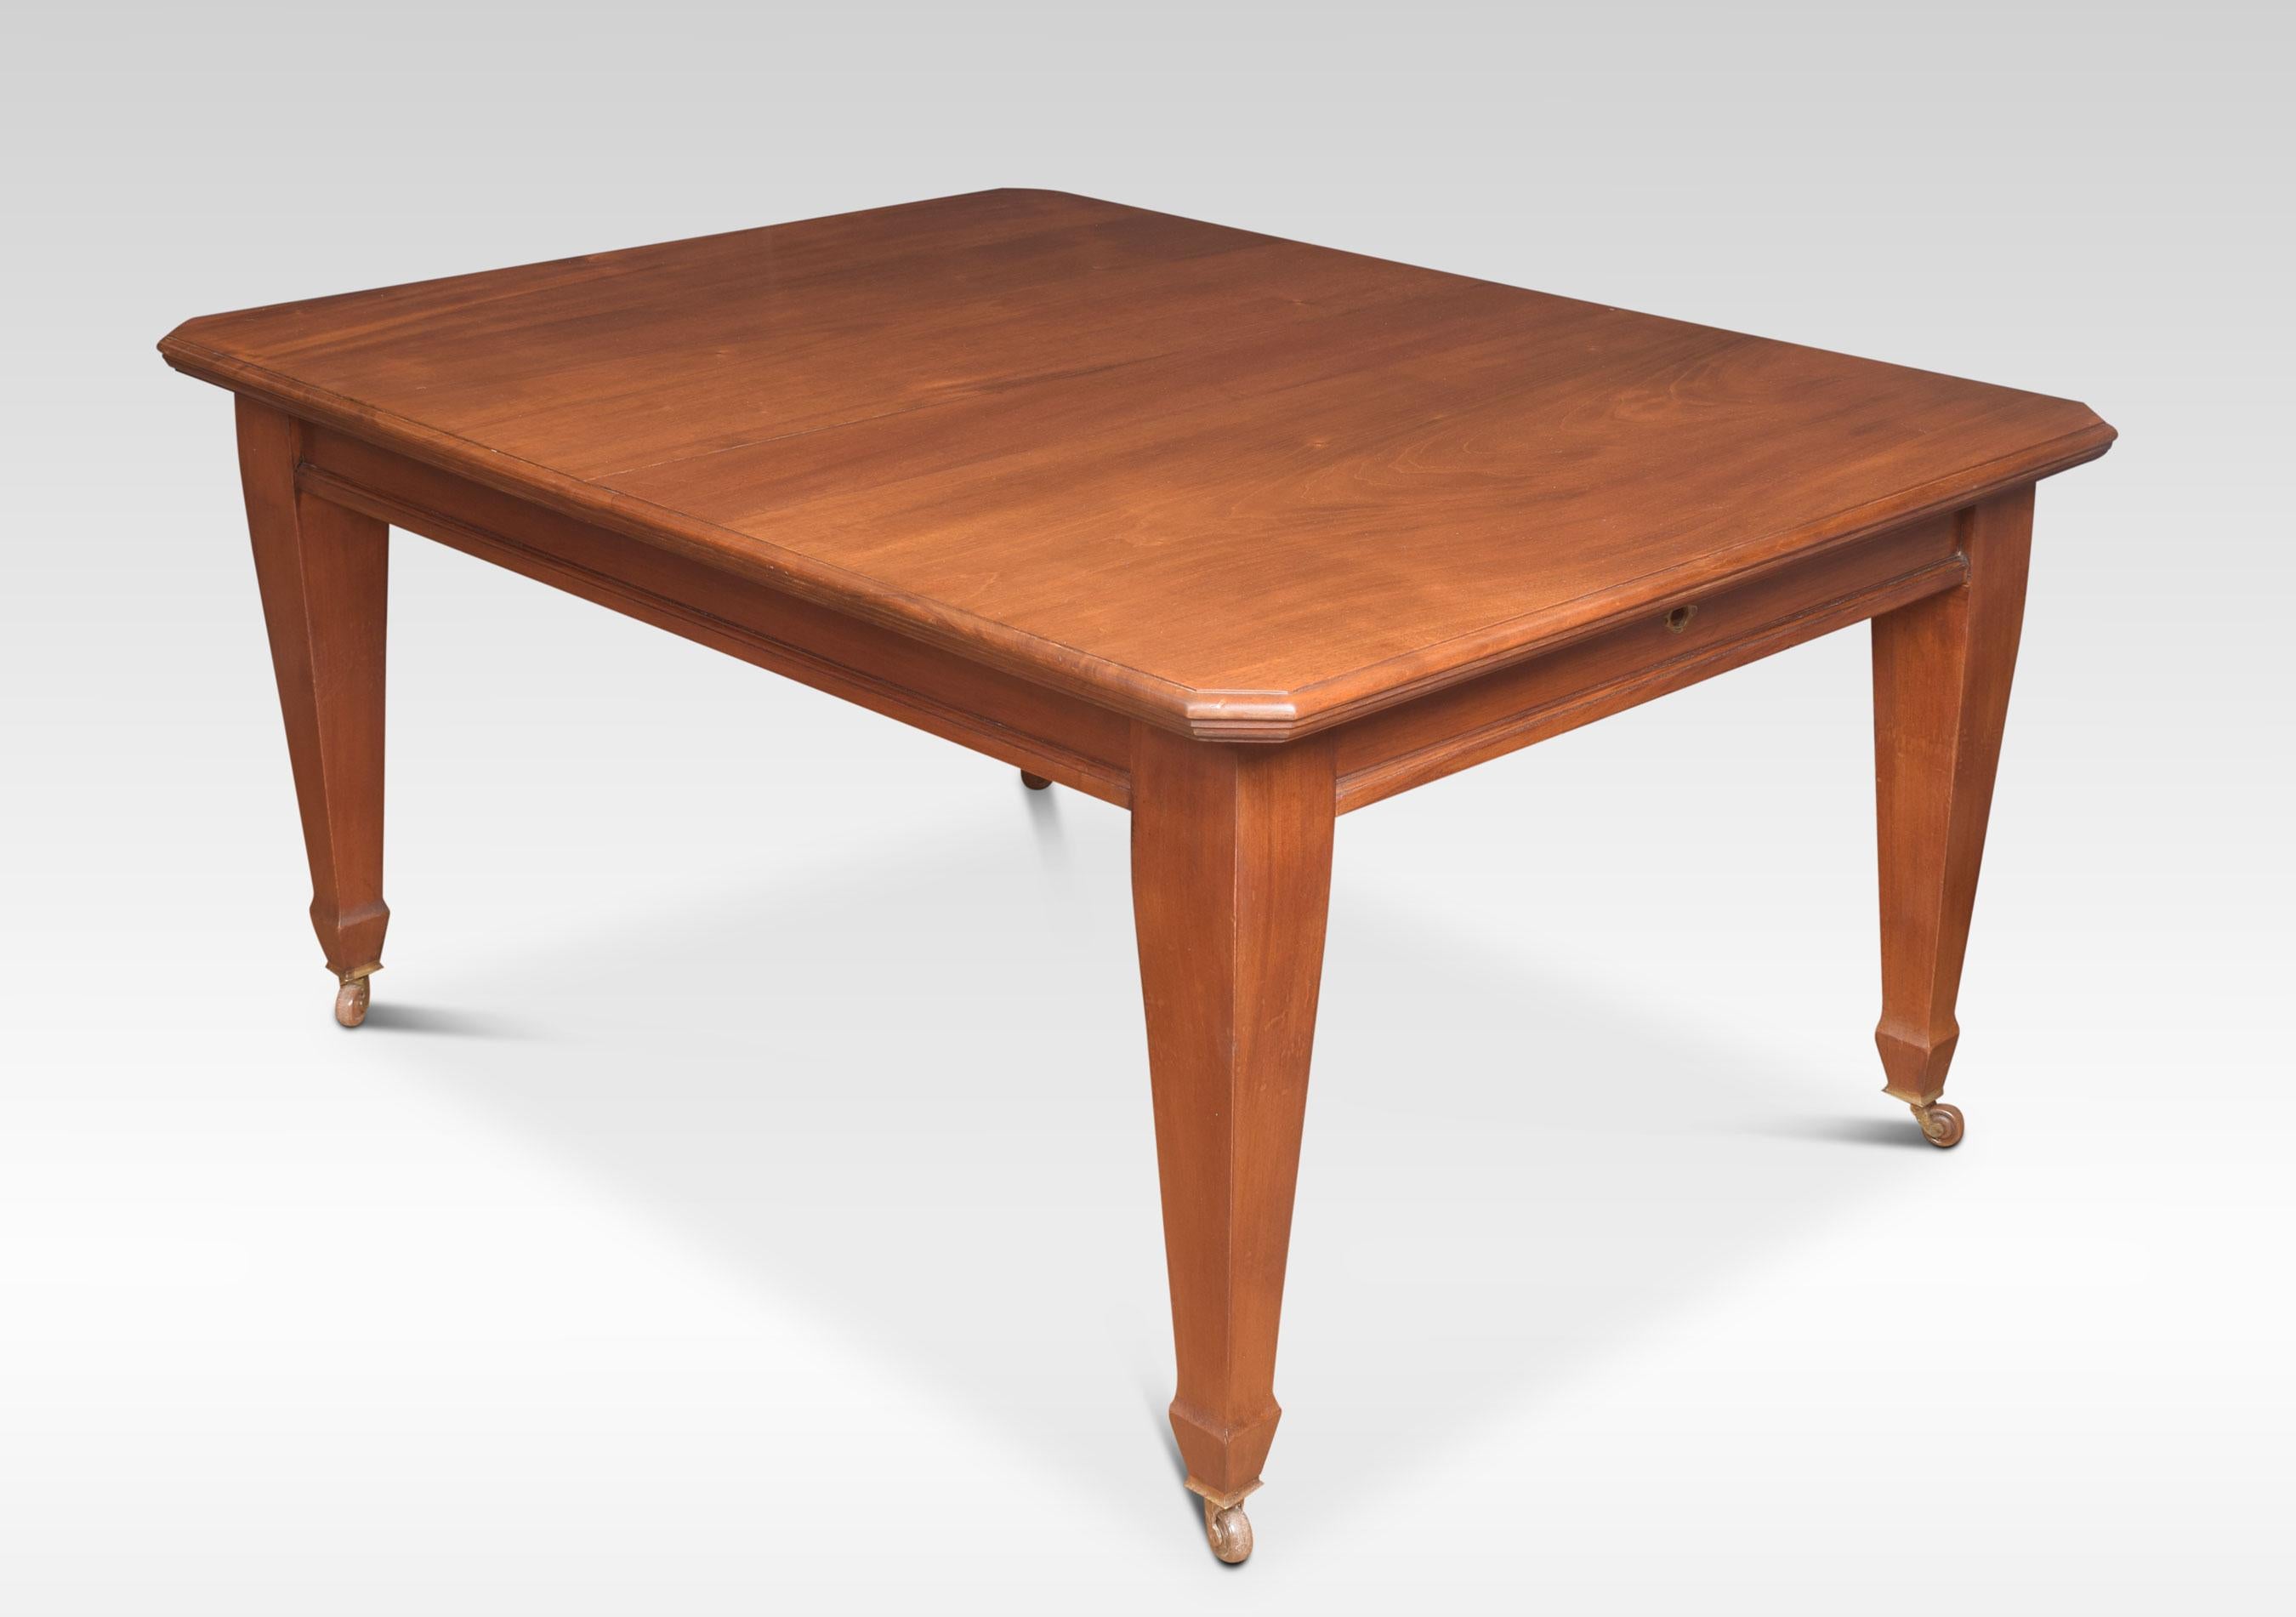 Walnut dining table, the rectangular top with canted corners and a moulded edge. To the telescopic action opening to incorporate three leaves, all raised up on tapering legs terminating in brass casters (will seat 10-12 people)
Dimensions
Height